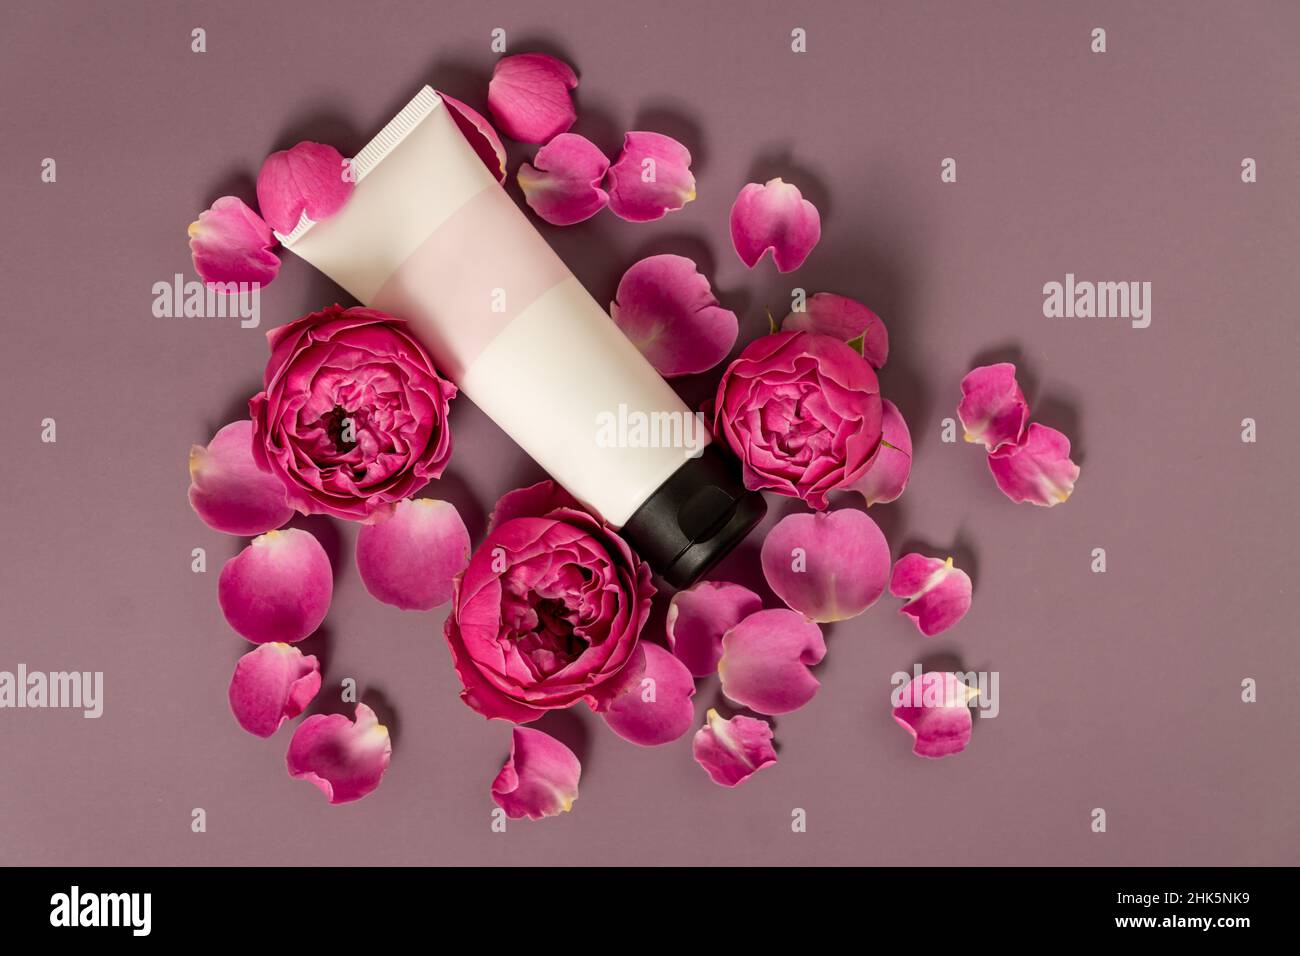 Beauty treatment. Tube with pink roses on a dark pink background. Beauty Spa and Wellness, anti-aging treatments with rose petals. The concept of yout Stock Photo